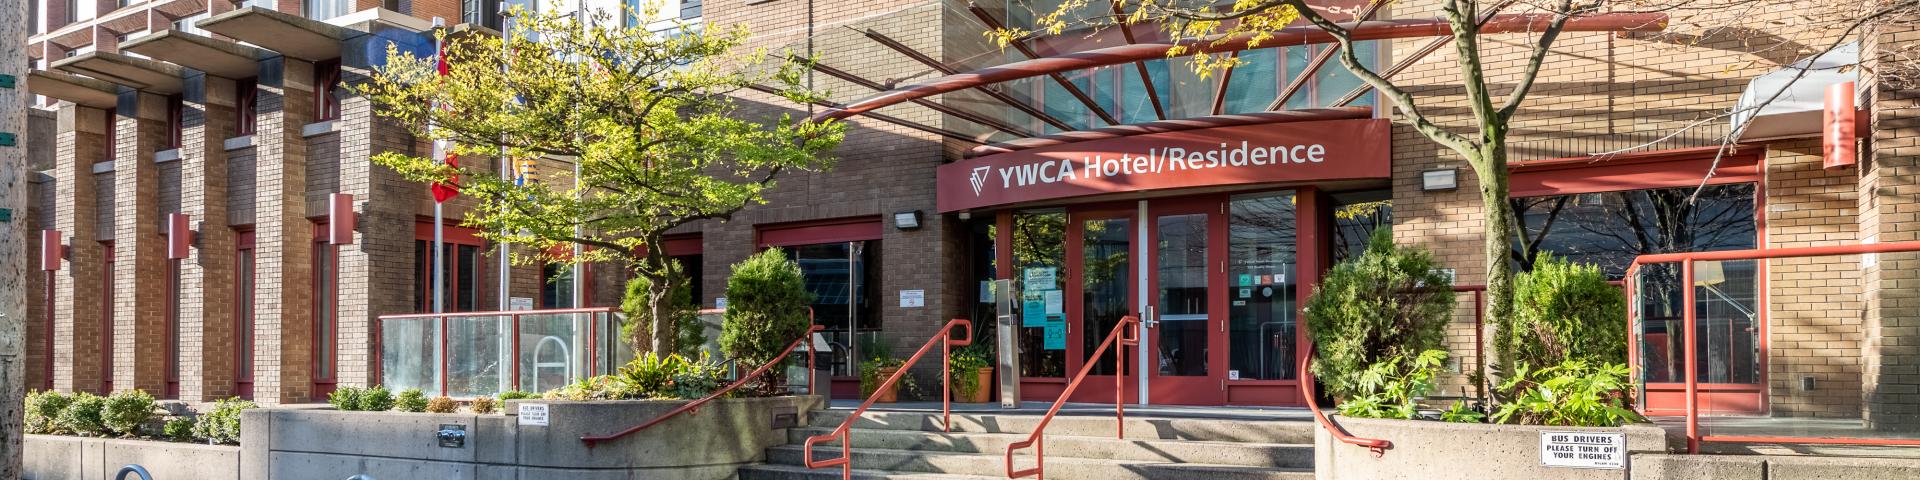 YWCA Hotel Vancouver Downtown 